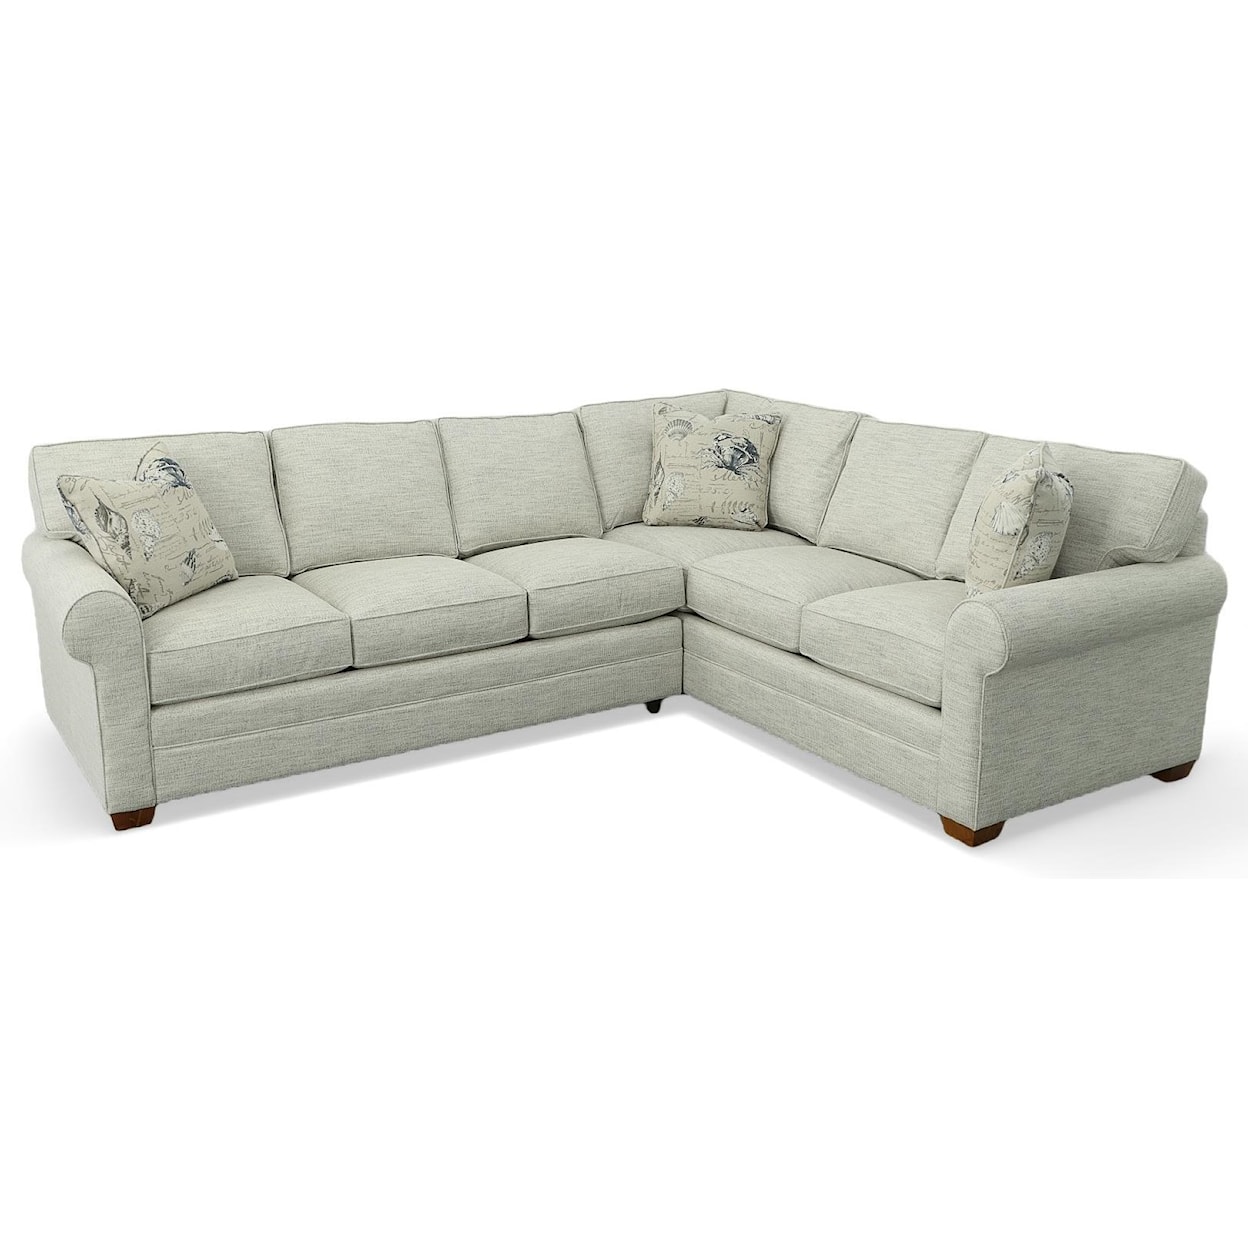 Braxton Culler Bedford 2 Piece Sectional